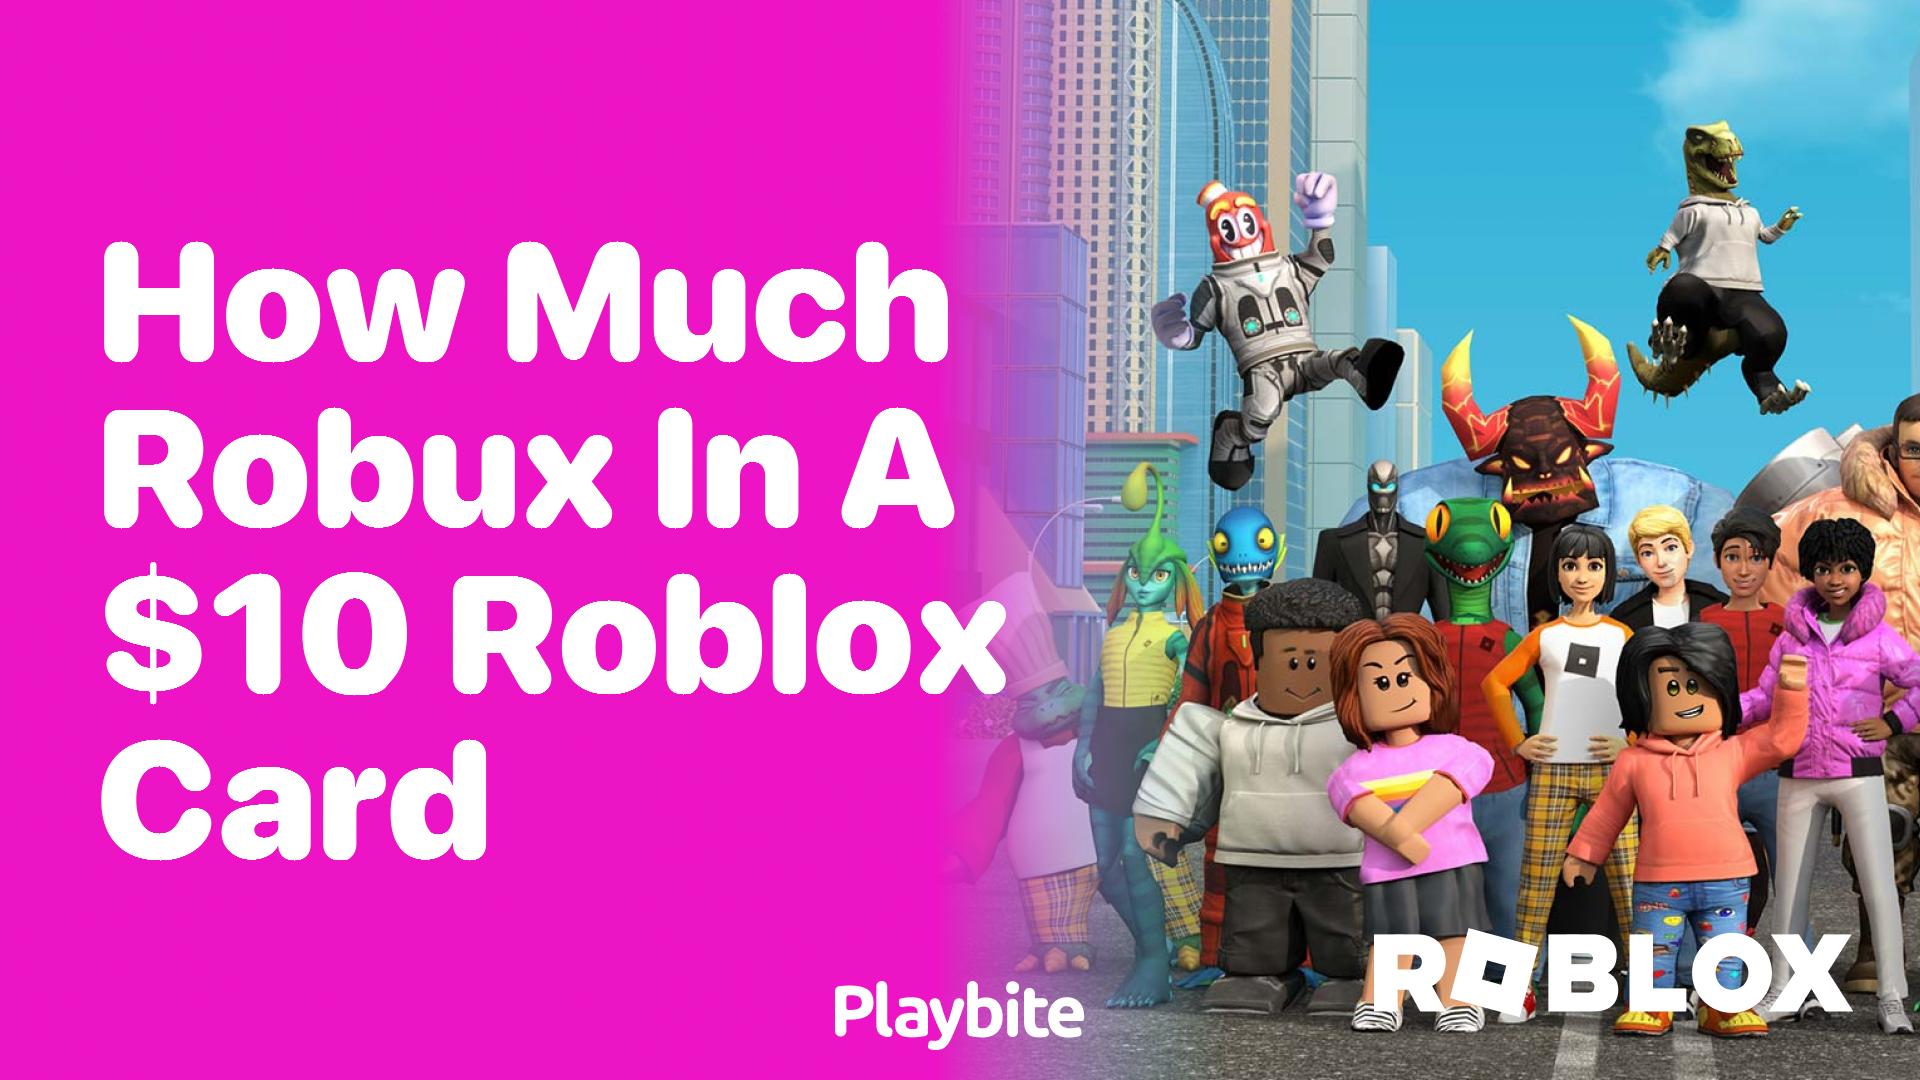 How much Robux is in a $10 Roblox card? - Quora